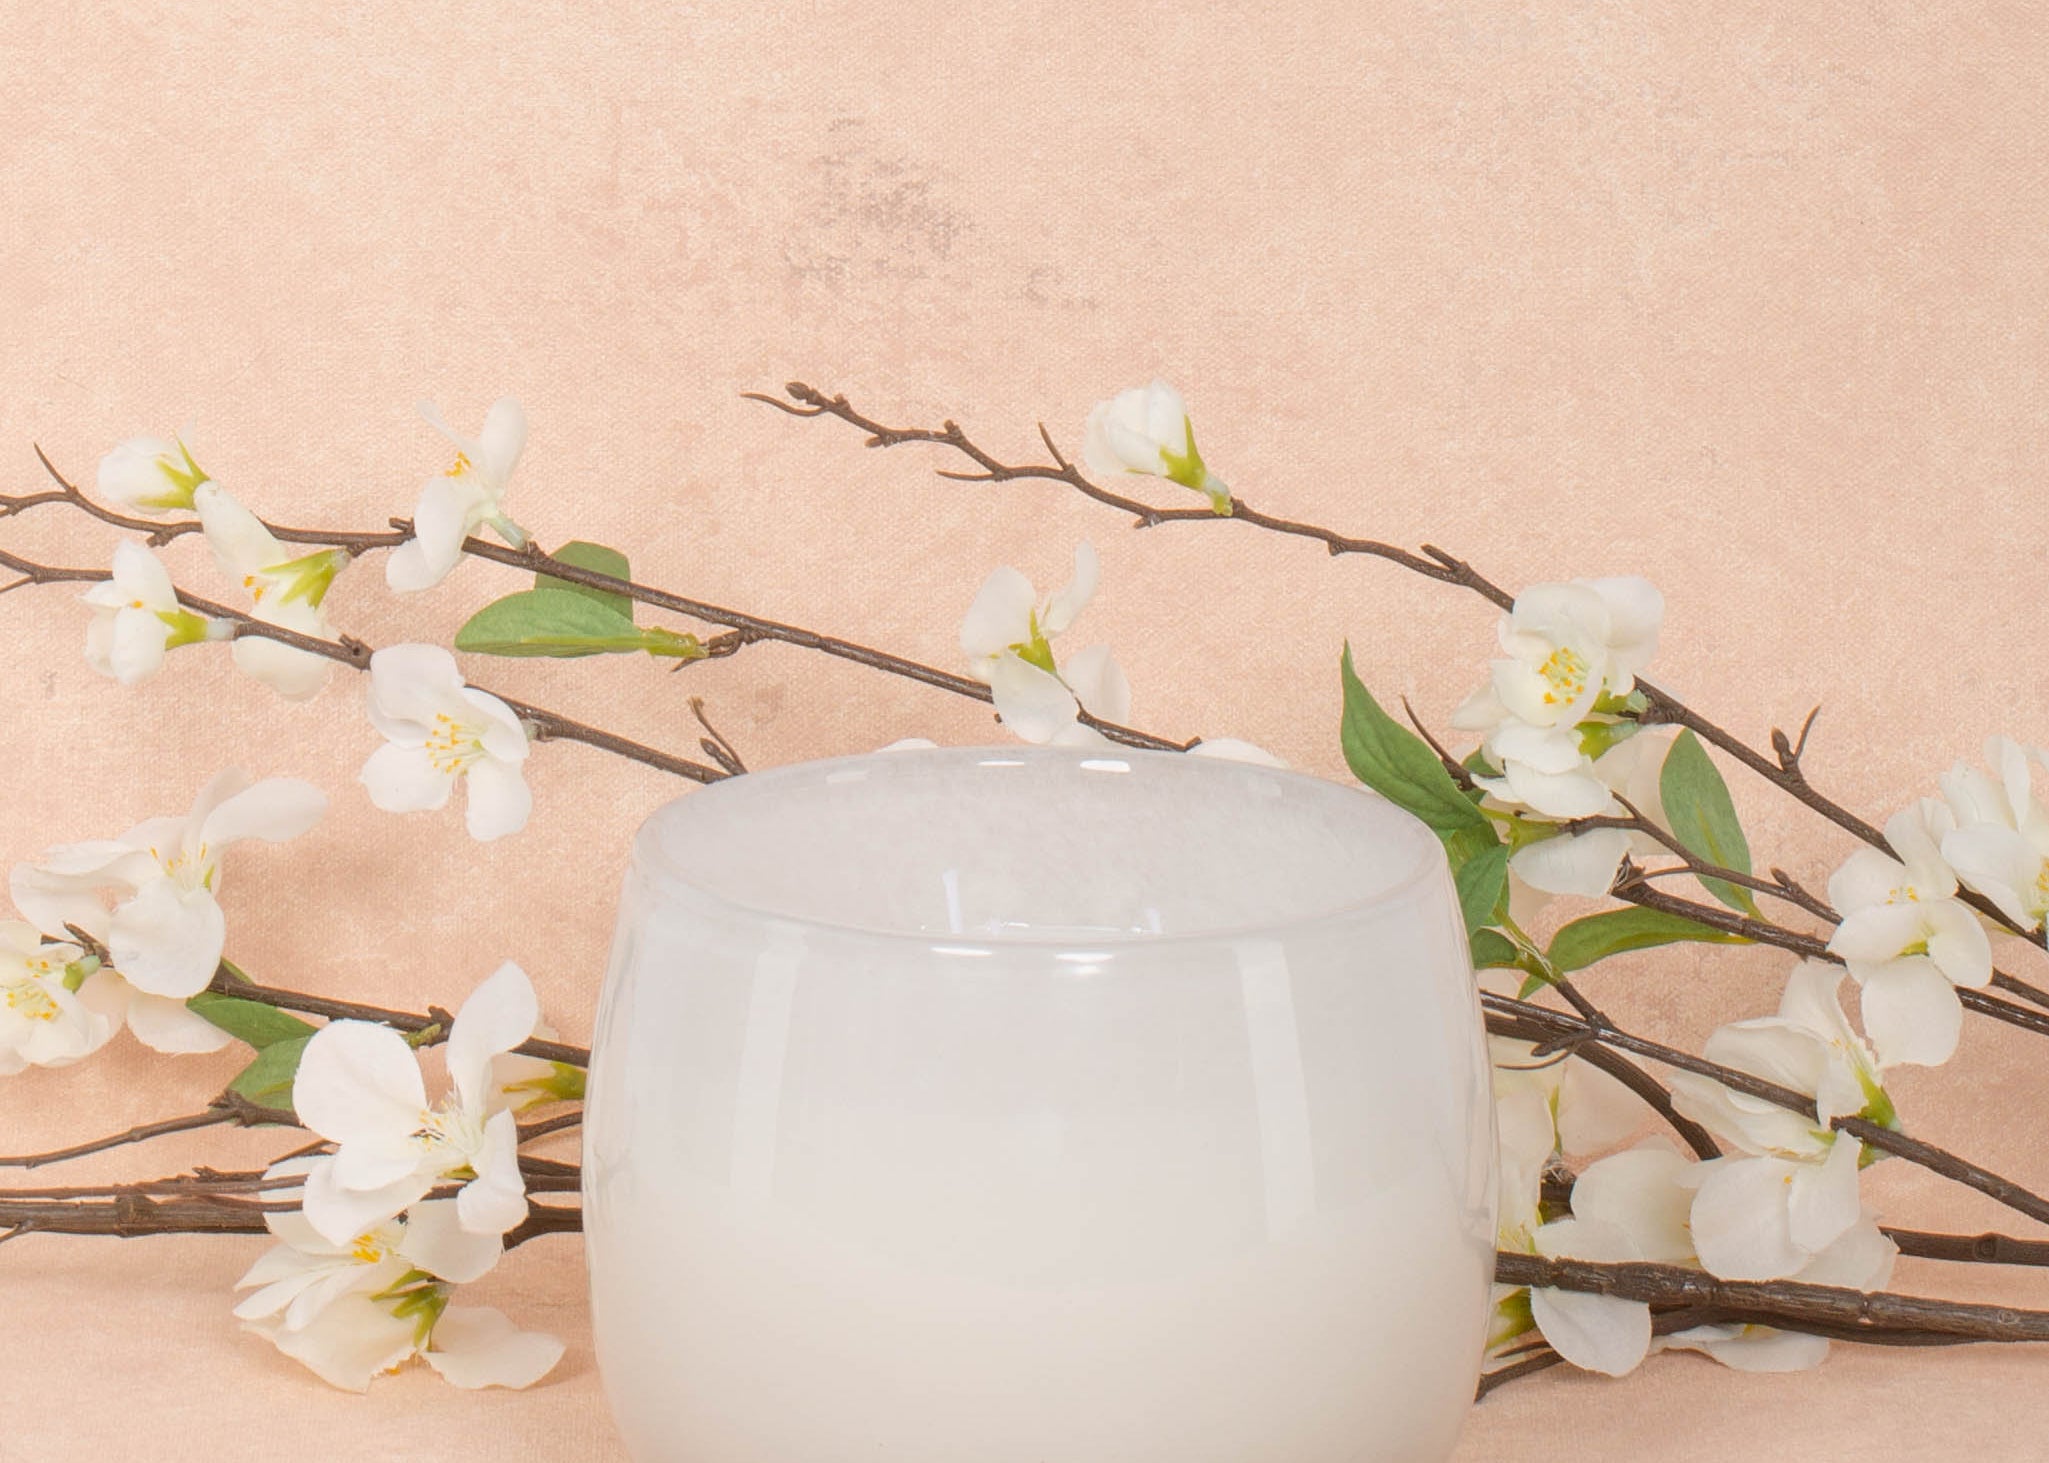 16oz Heure du Thé Ballon candle by Alixx in white. Lily of the valley, water cedar, and musk fragrance. White flowers and pink background behind.